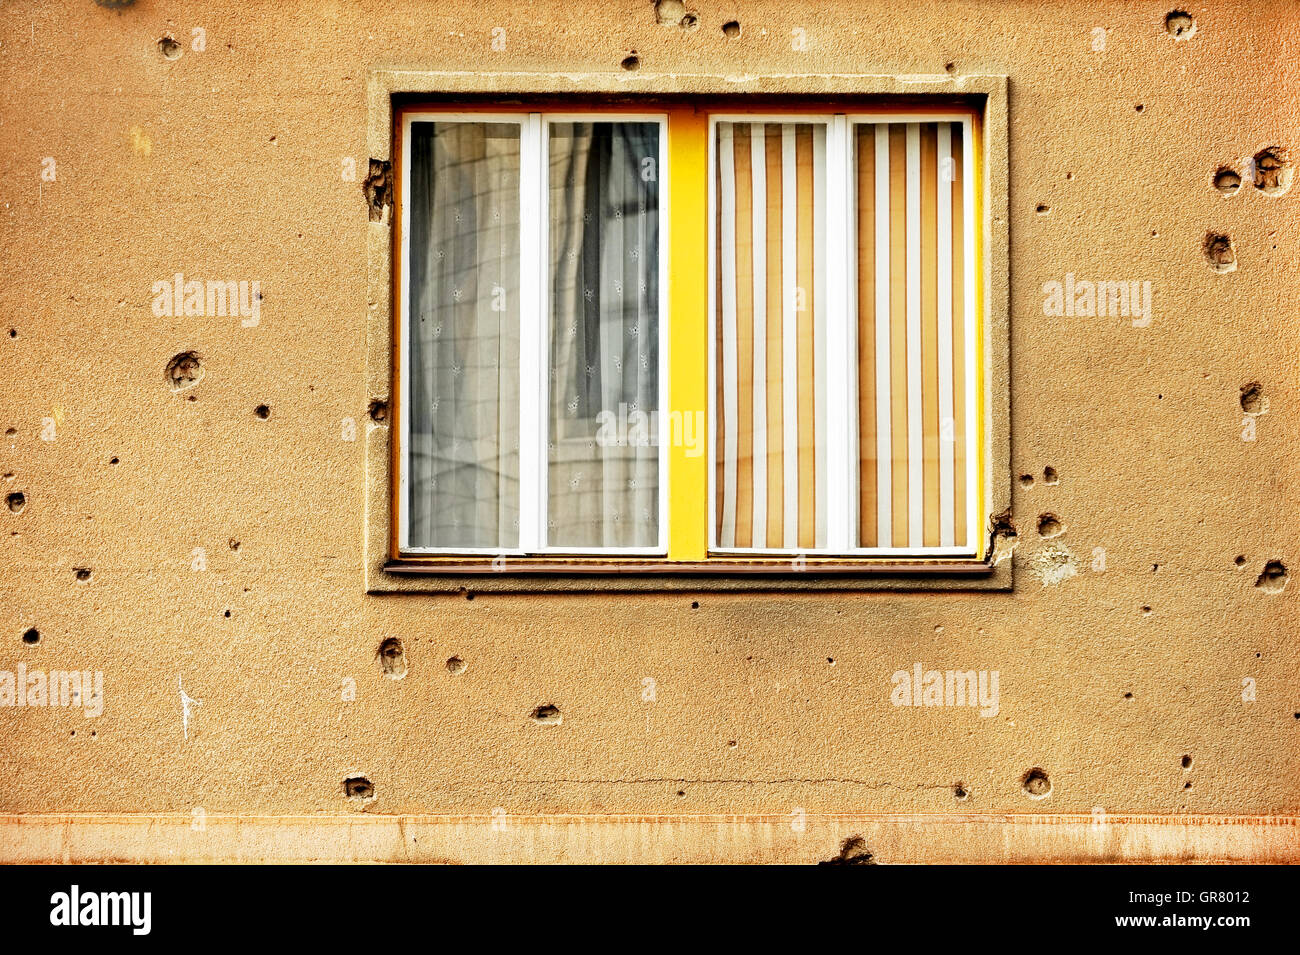 Traces of bullets on a building facade destroyed by war Stock Photo